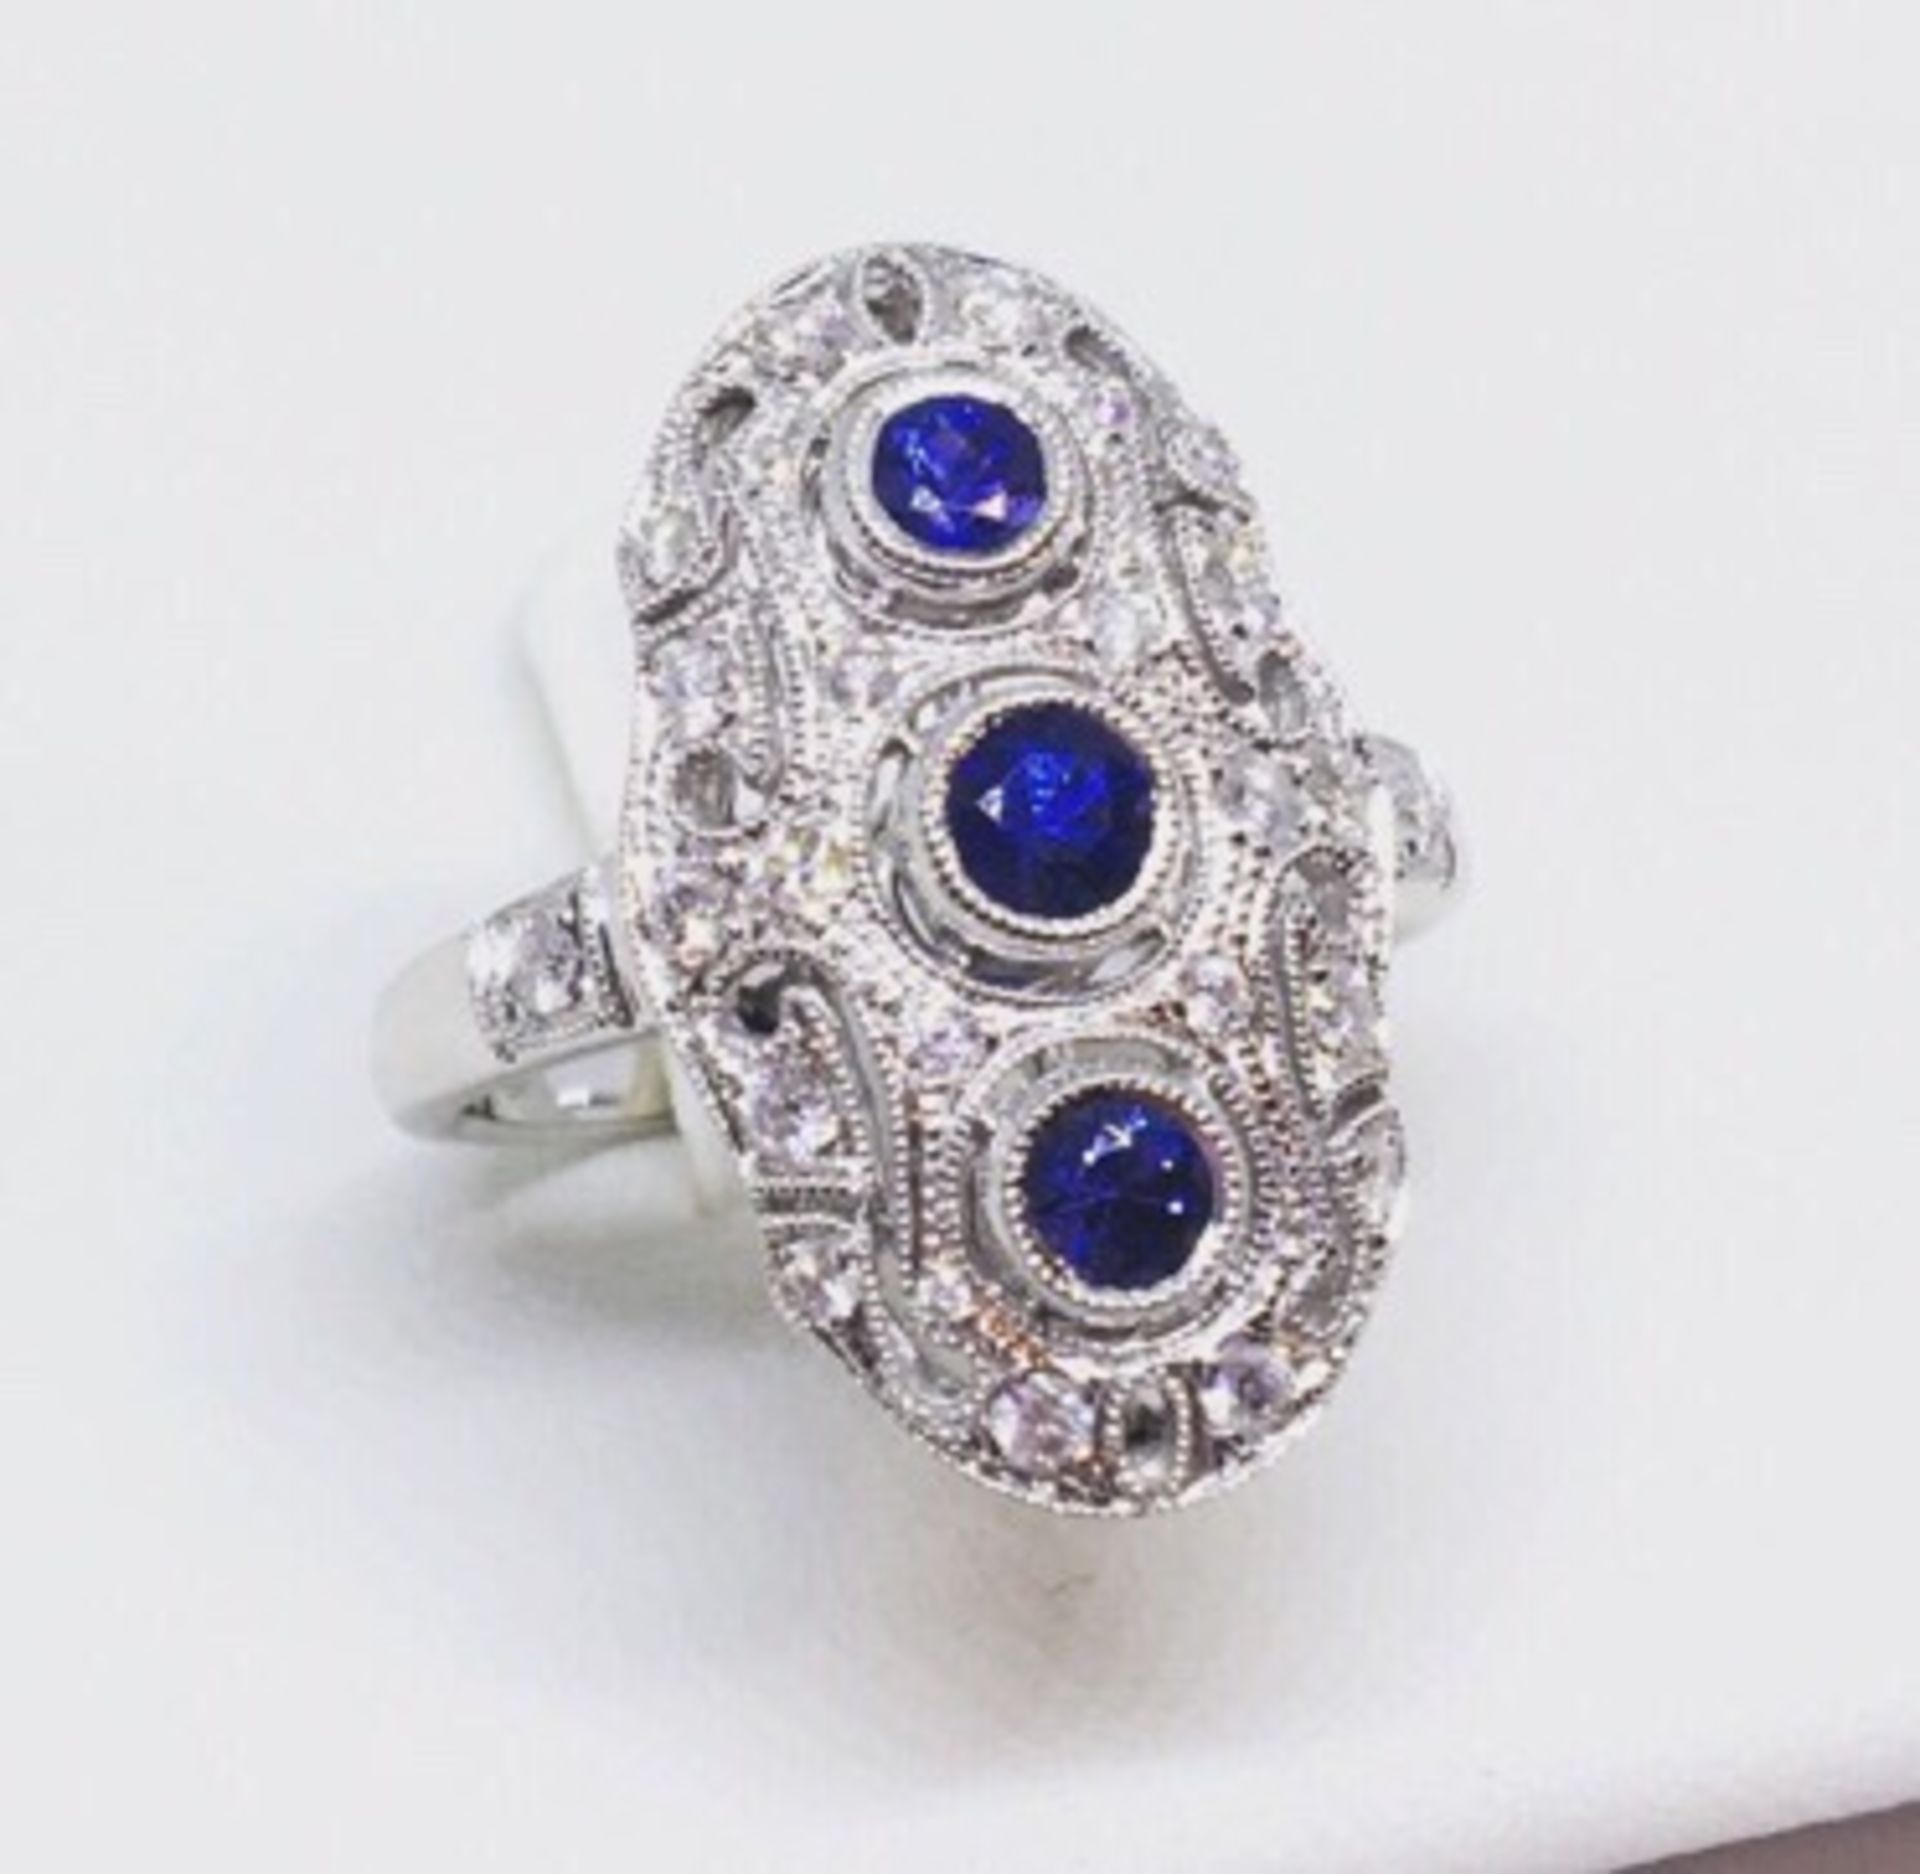 18CT GOLD SAPPHIRE & DIAMOND DECO STYLE RING - Image 4 of 4